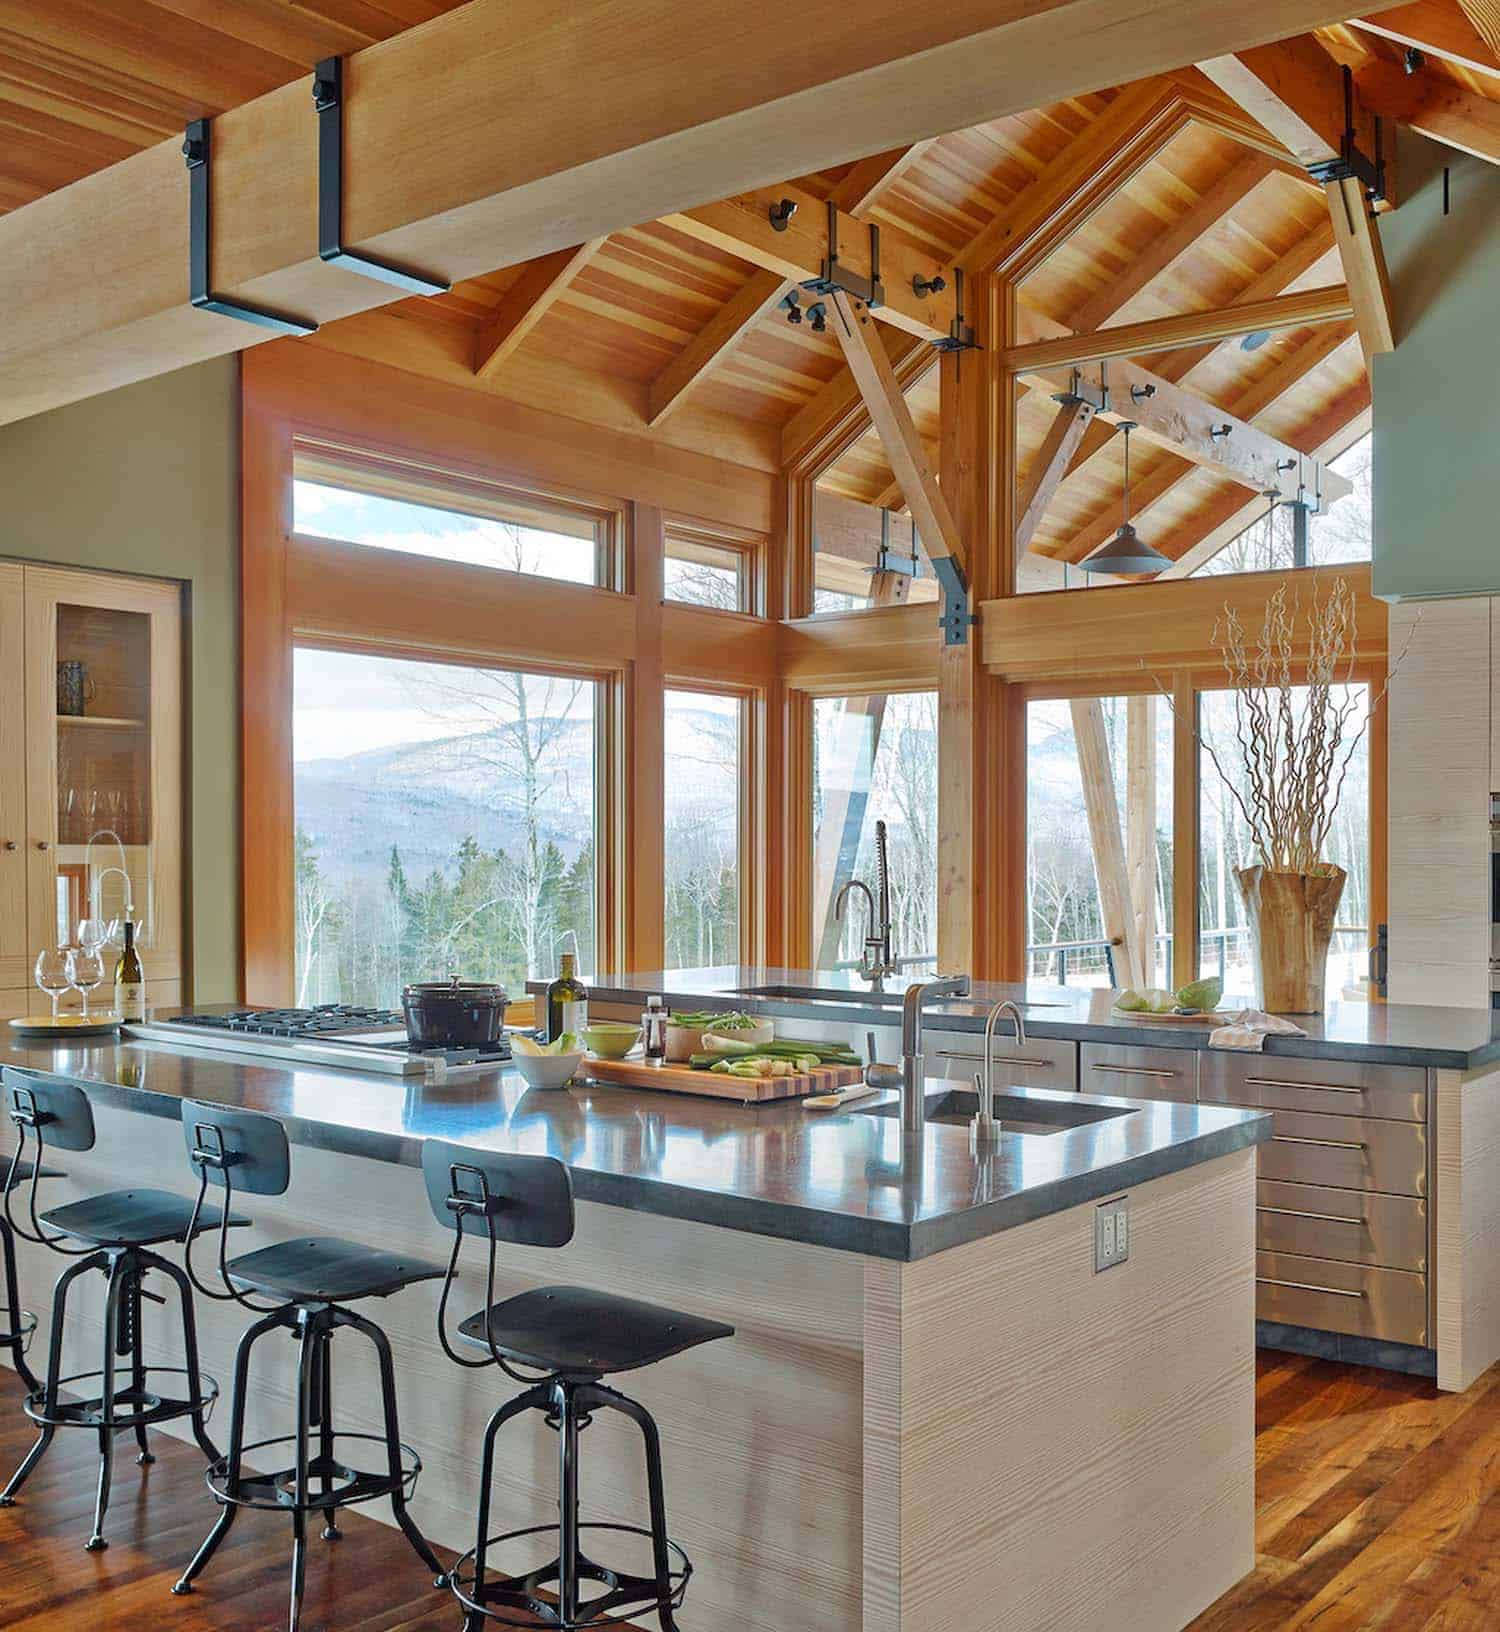 modern mountain style kitchen with wood ceiling trusses and large window view